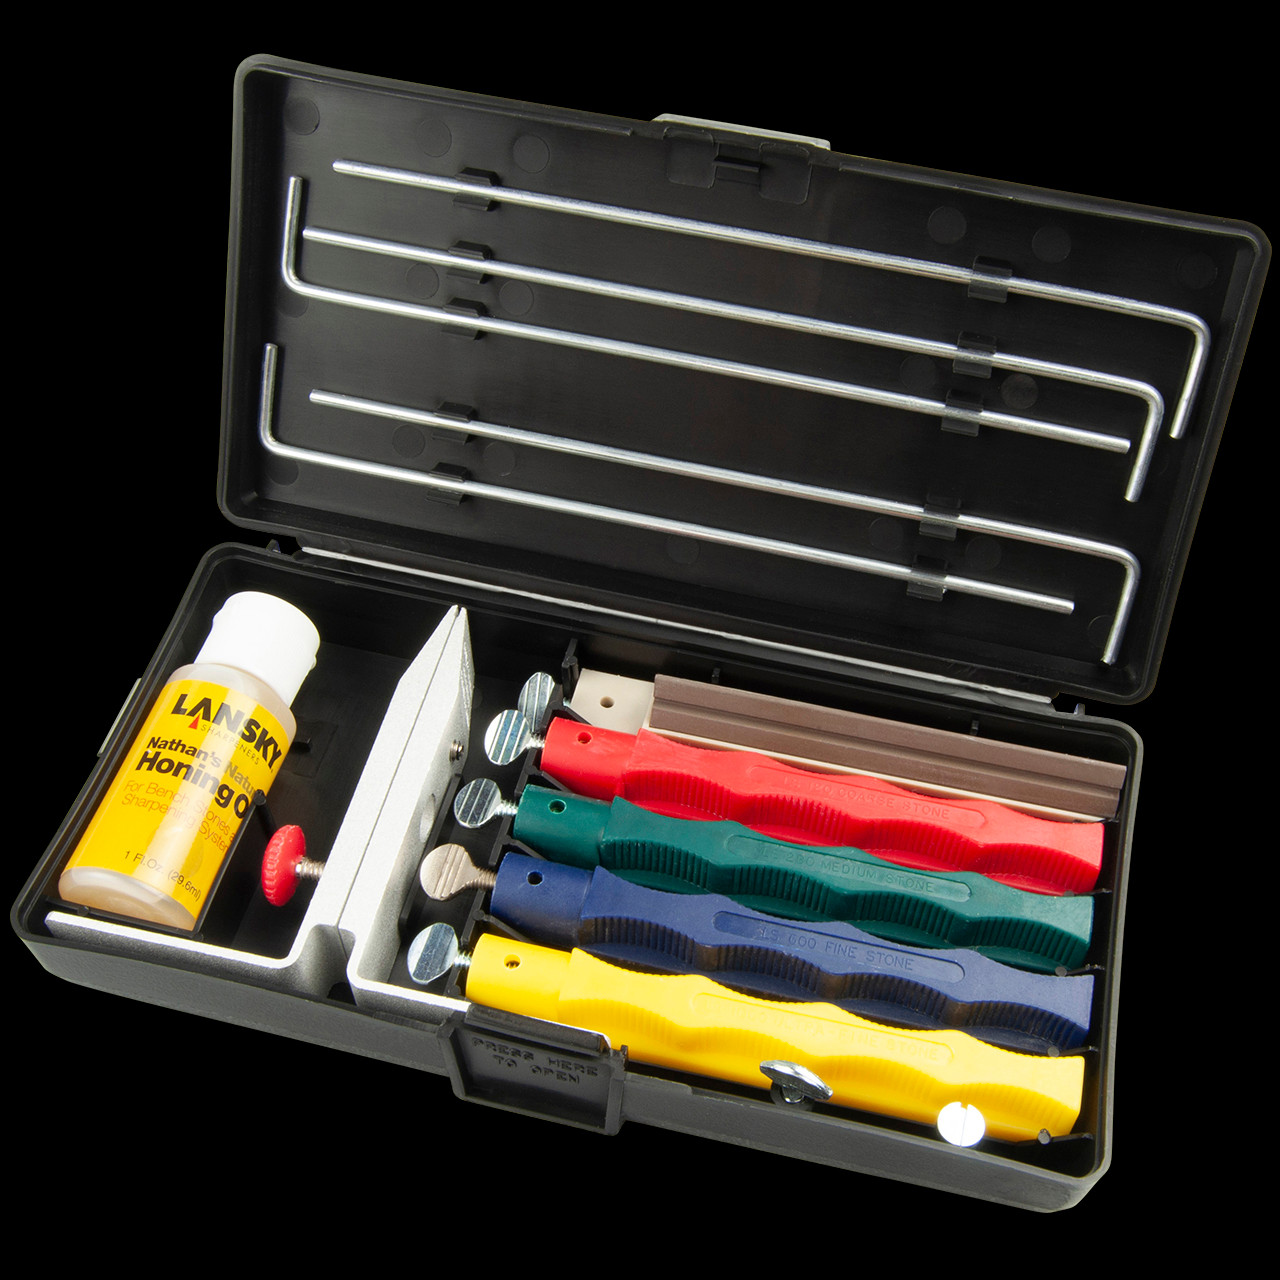 Lansky Deluxe Diamond Sharpening System  Advantageously shopping at